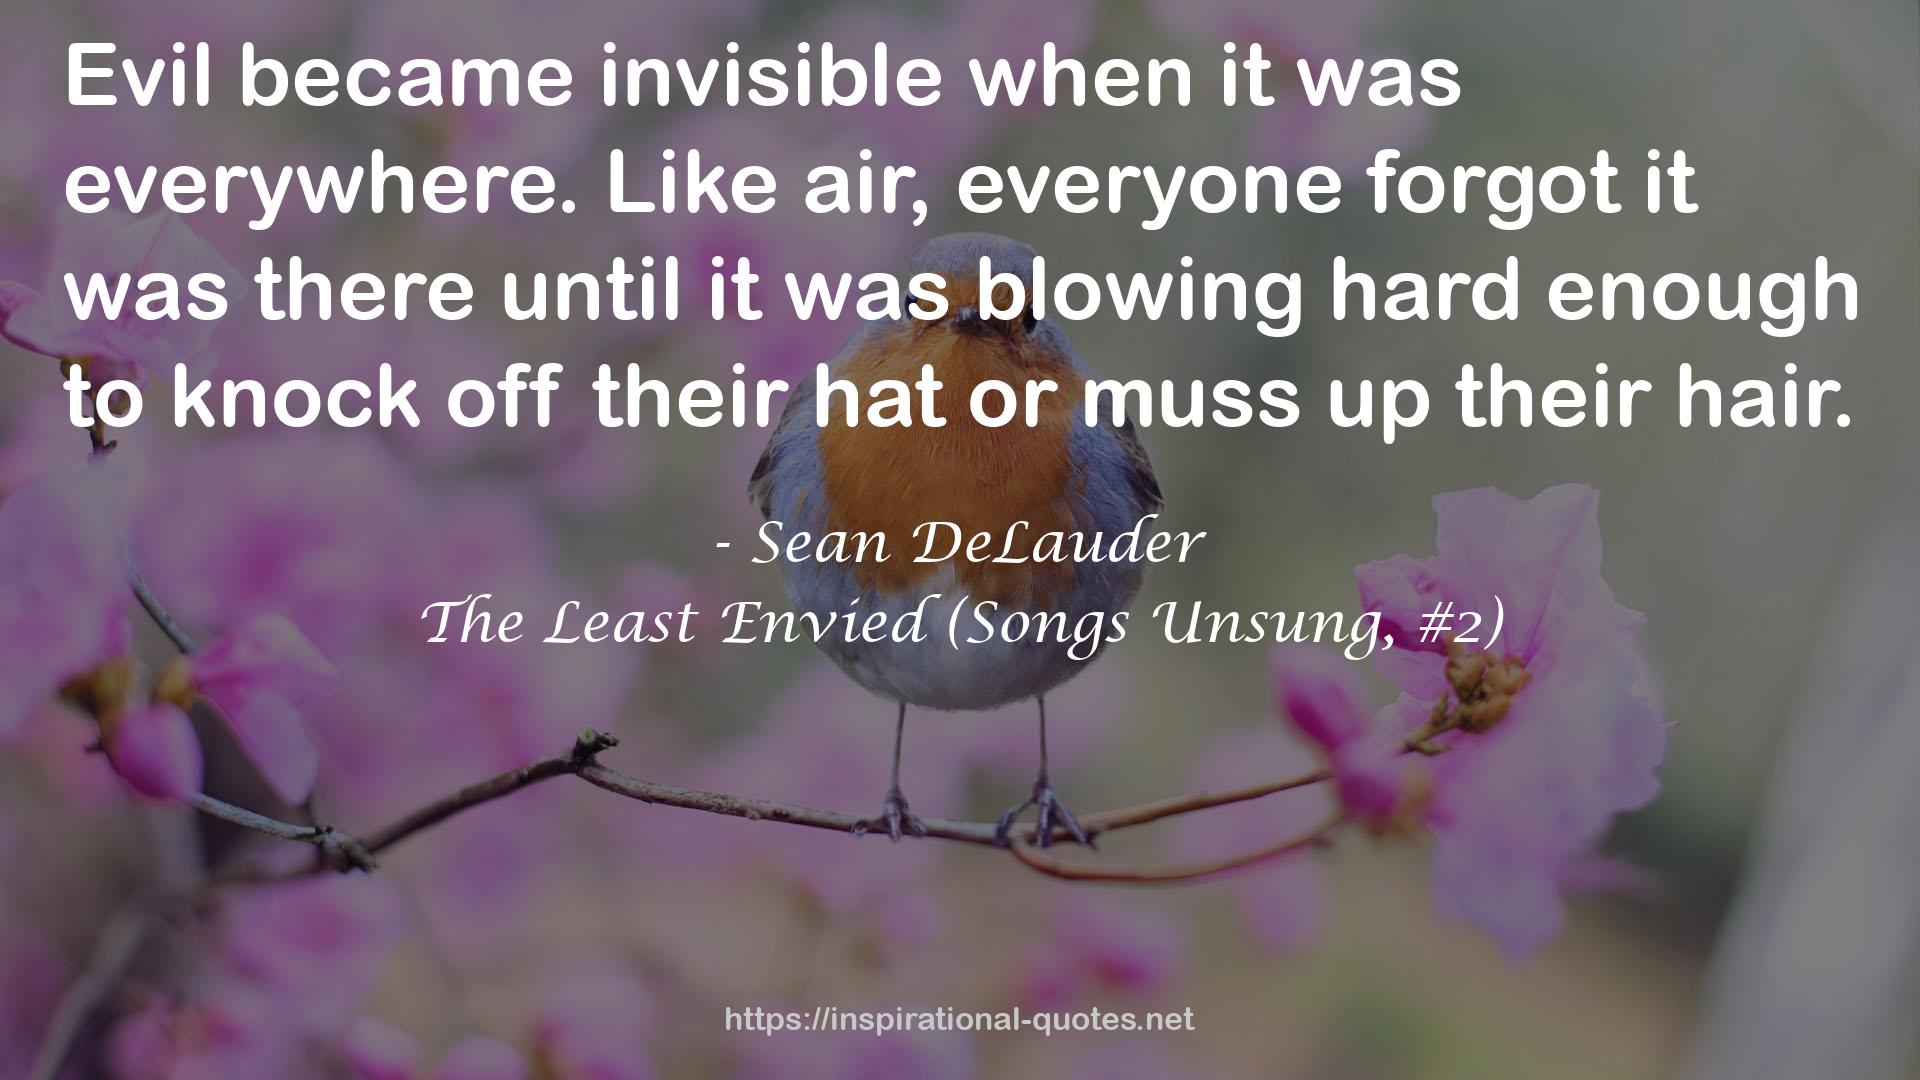 The Least Envied (Songs Unsung, #2) QUOTES